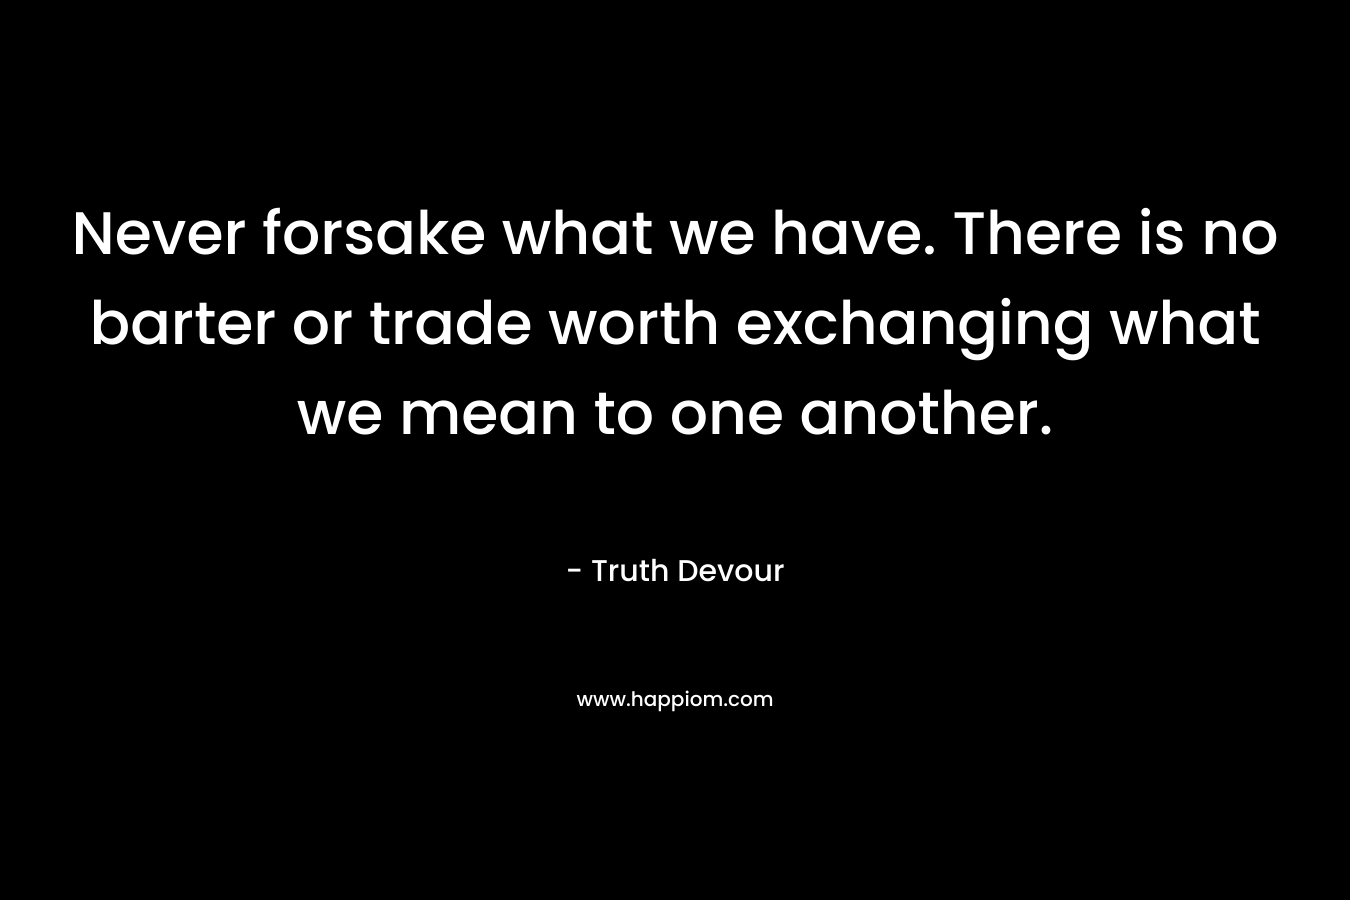 Never forsake what we have. There is no barter or trade worth exchanging what we mean to one another. – Truth Devour